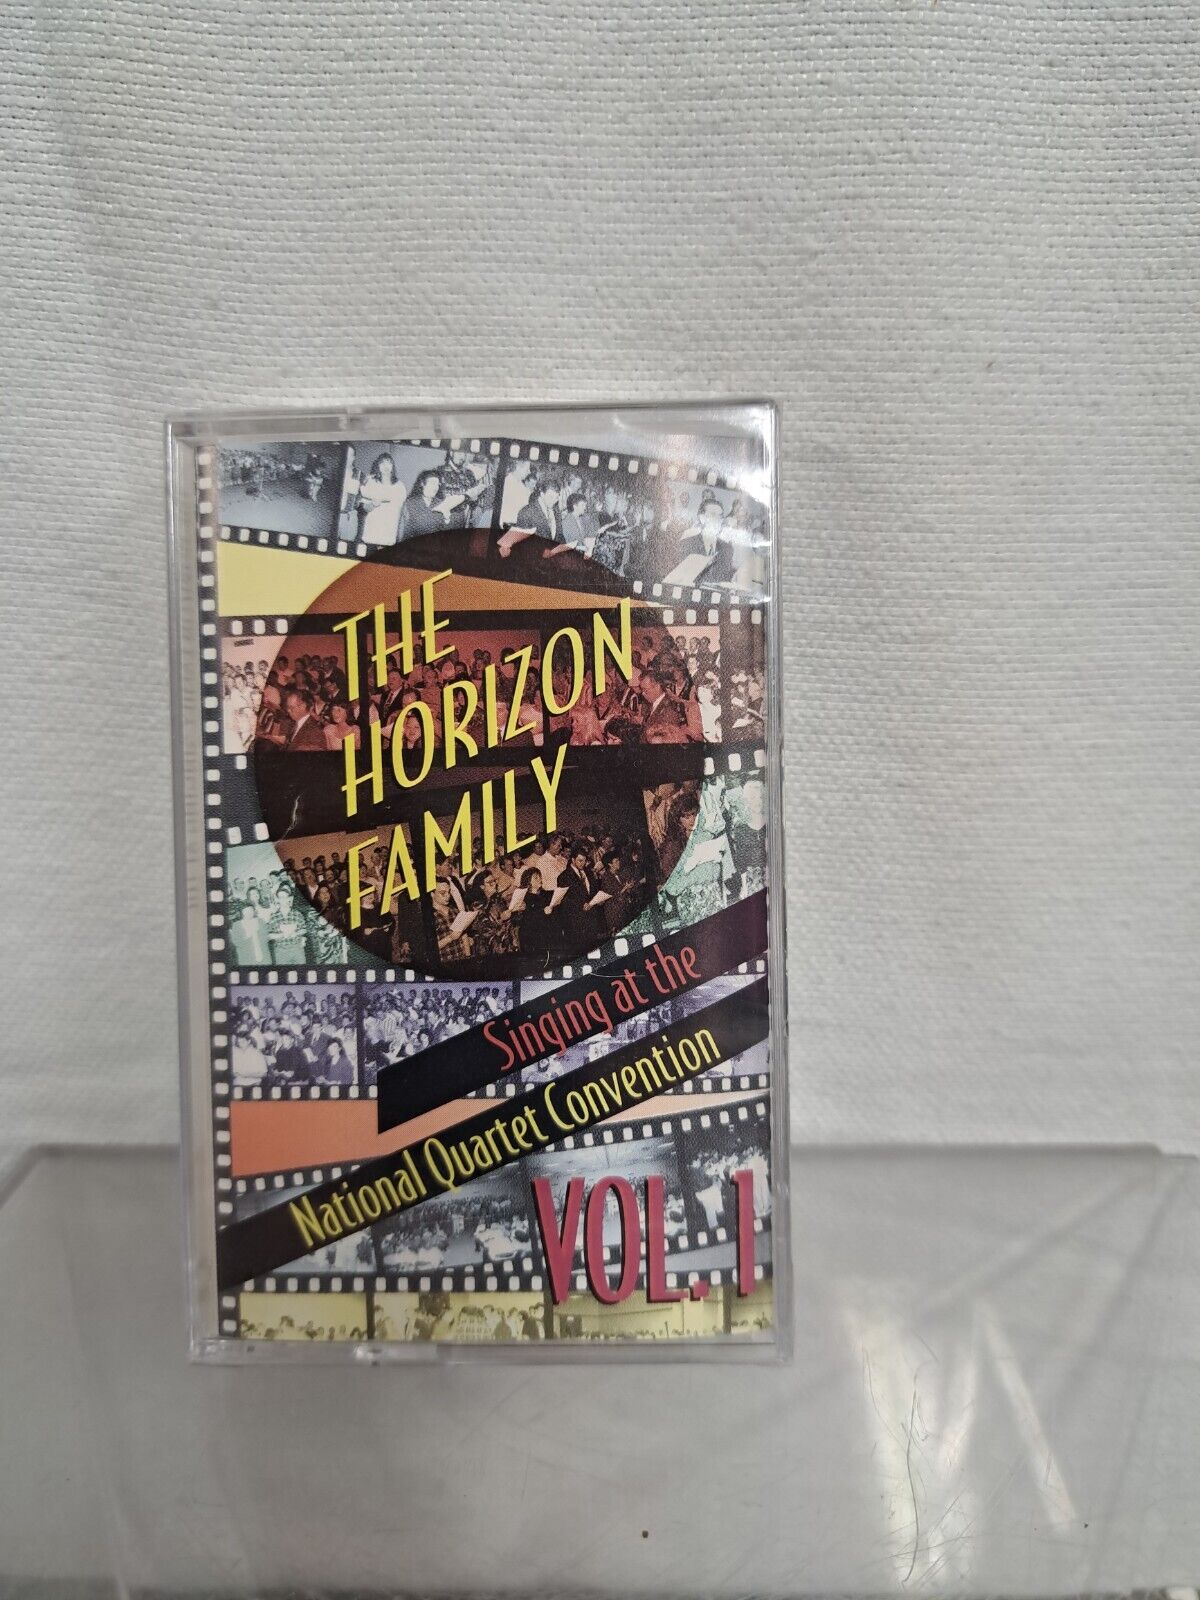 New The Horizon Family-Singing At The National Quartet Convention Vol.1 Cassette